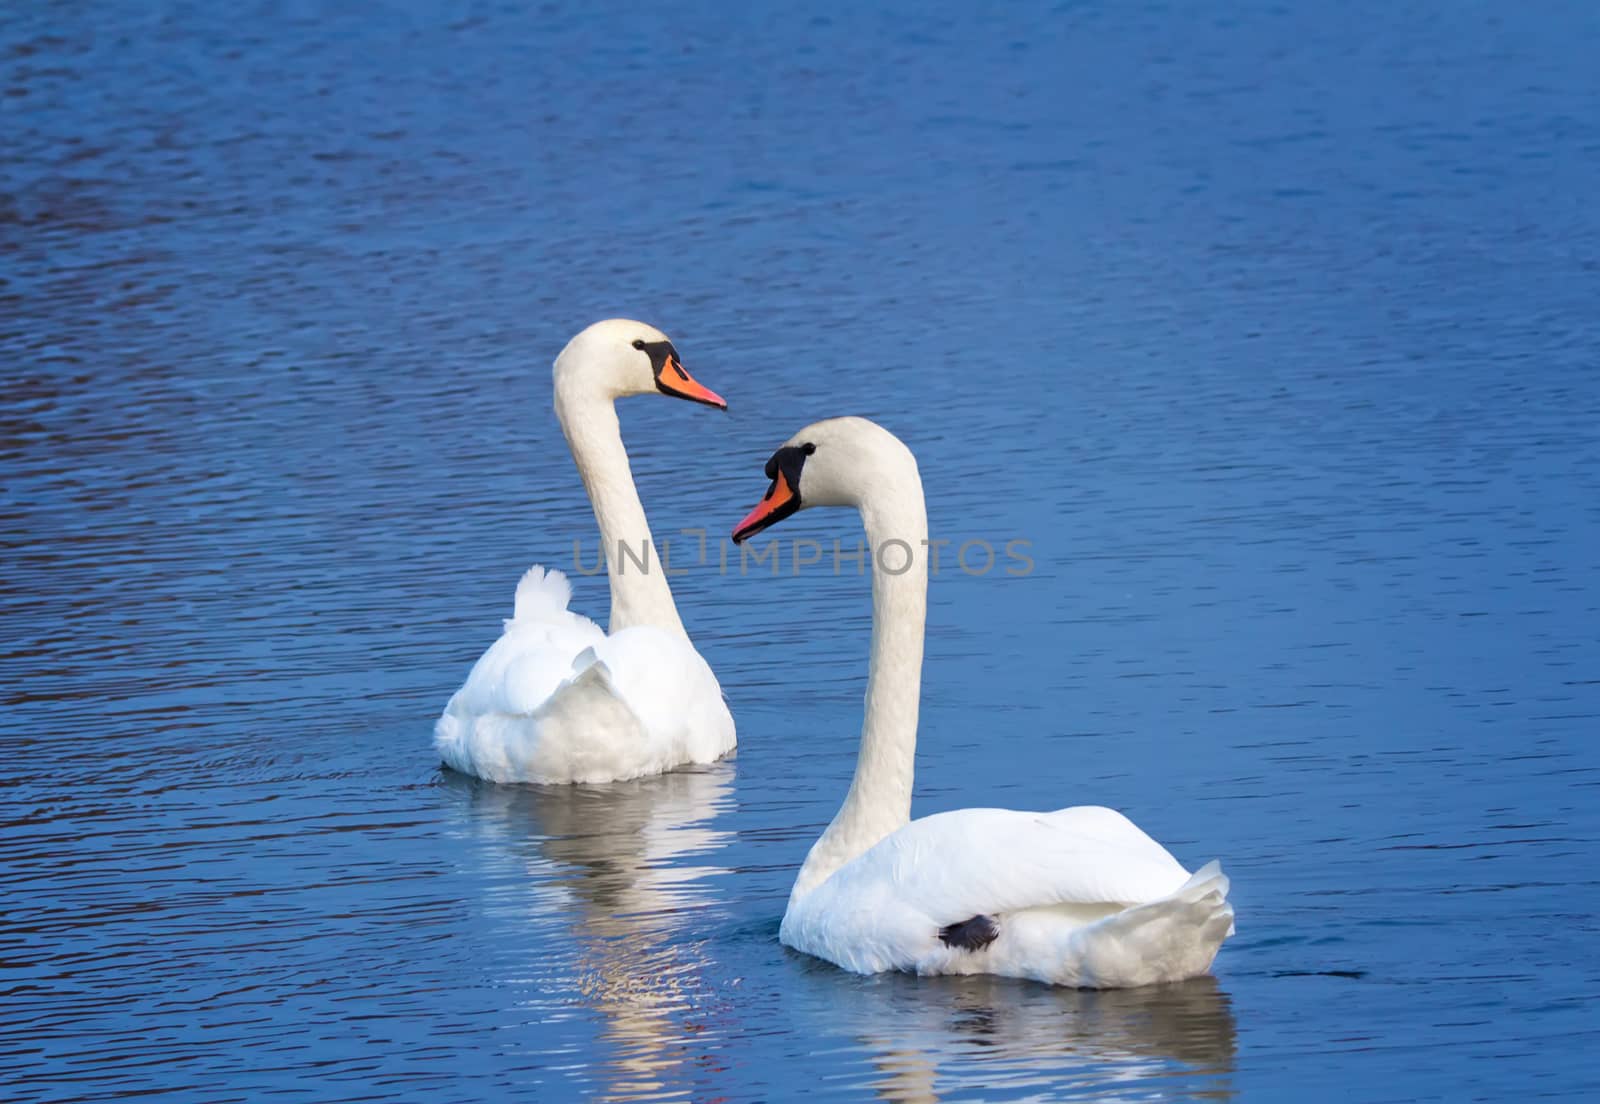 A pair of beautiful wild white swans floating on the blue surface of the lake.